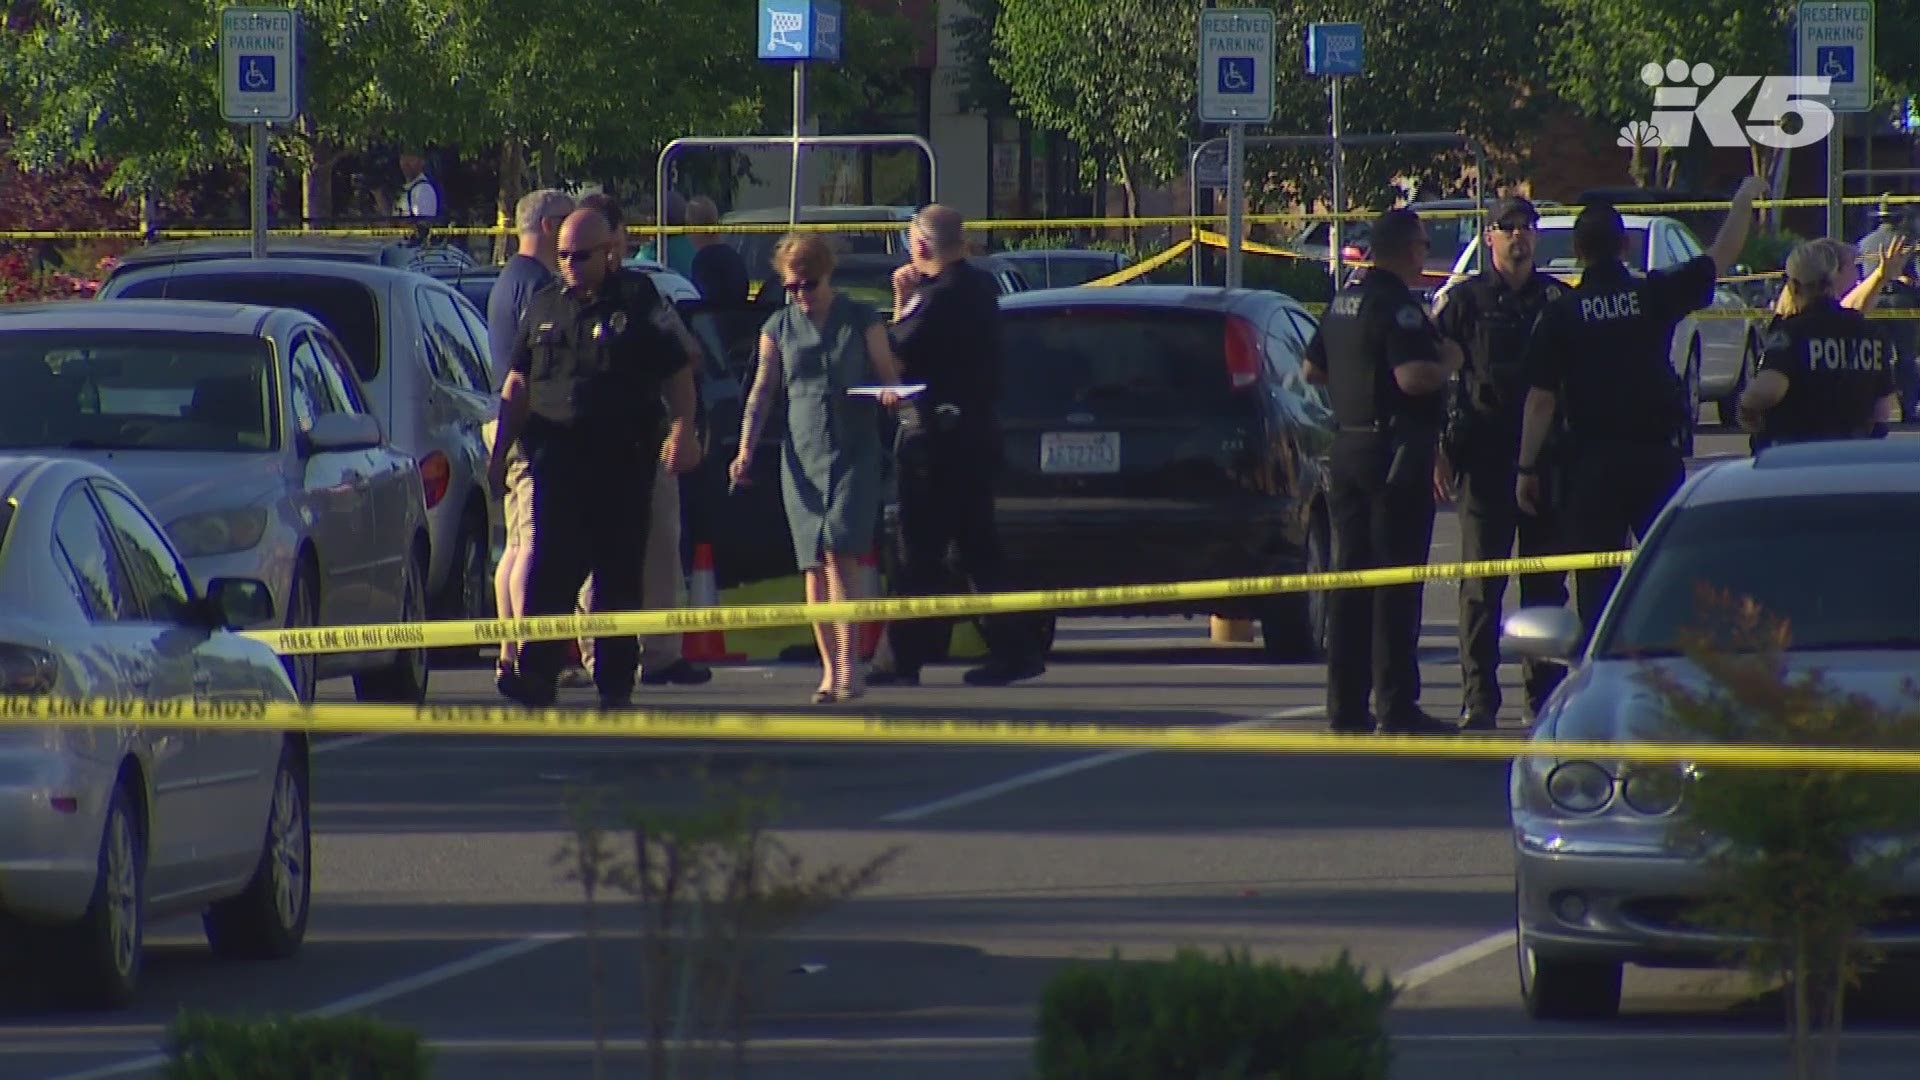 A gunman injured two people before being fatally shot by an armed civilian at a Walmart in Tumwater, Washington on Sunday, June 17, 2018.